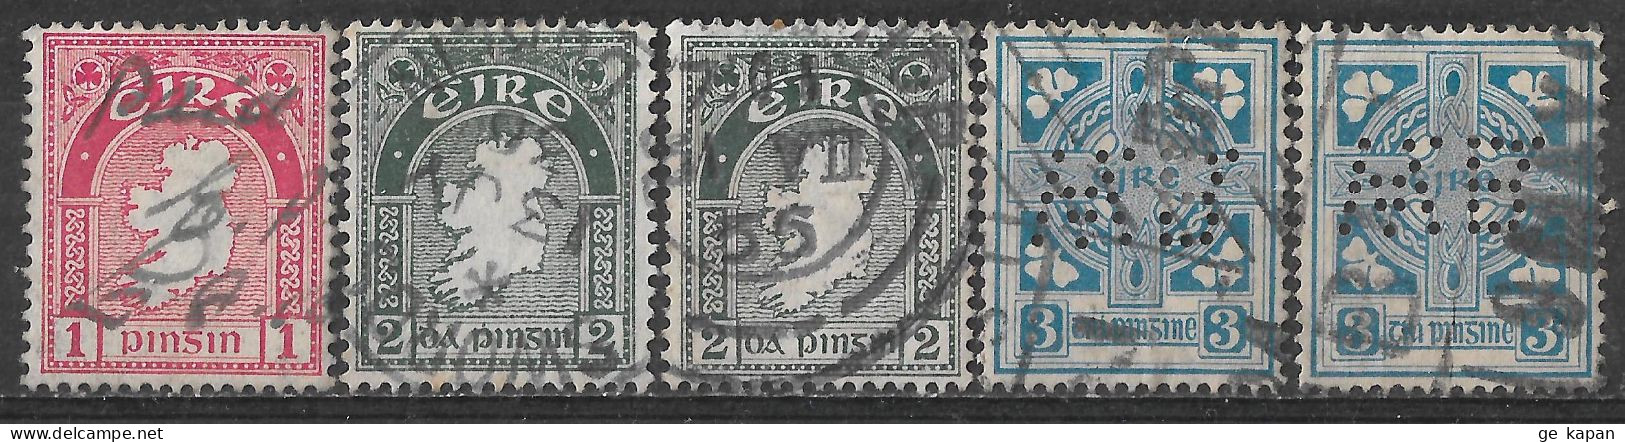 1922-1923 IRELAND SET OF 5 USED STAMPS (Michel # 41A,43A,45A) CV €5.30 - Gebraucht